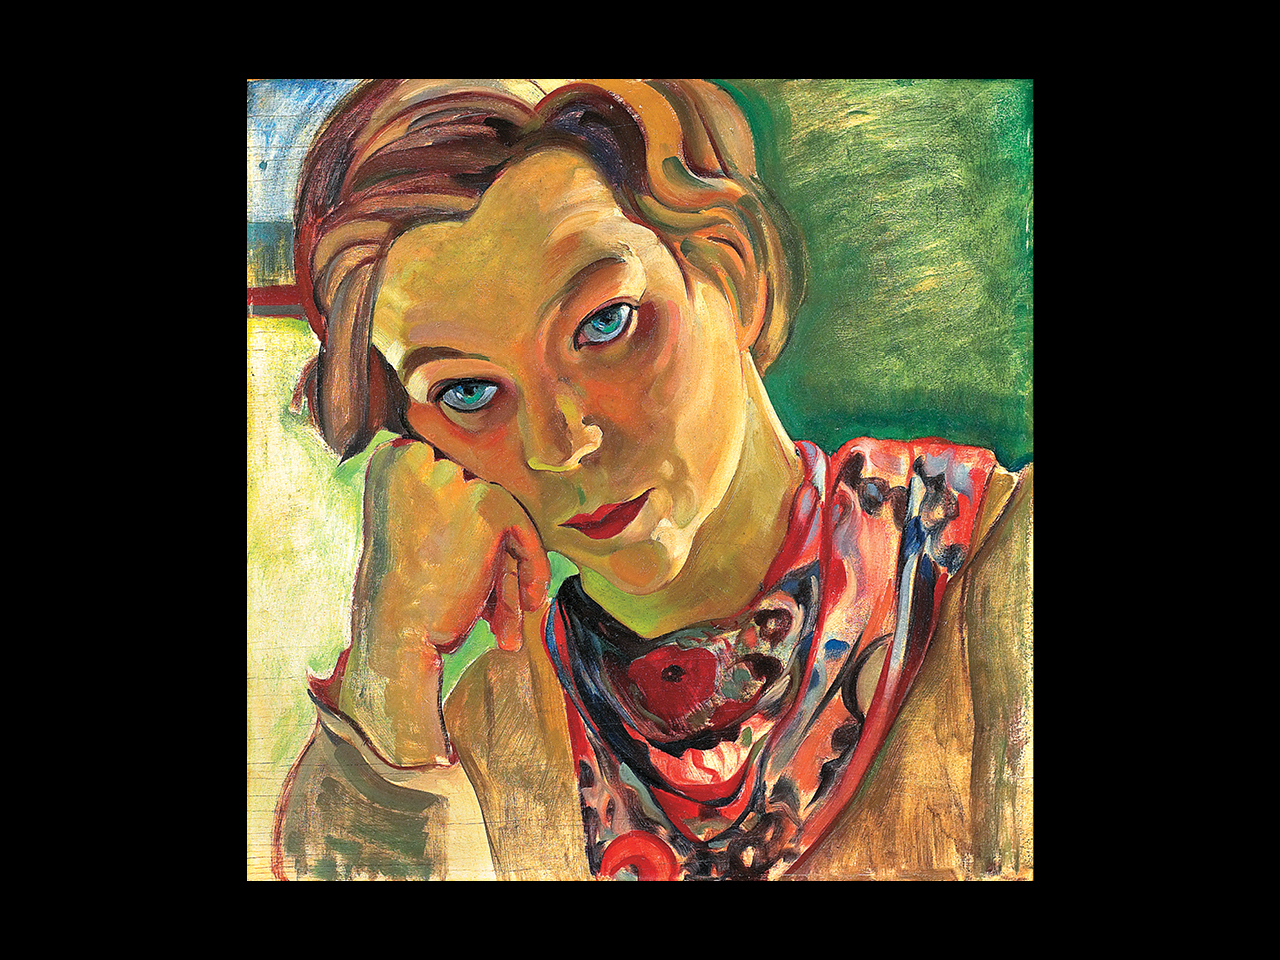 A photo of a painted self-portrait of the arts Pegi Nicol, a while woman with blue eyes and brown hair resting her head on her hand